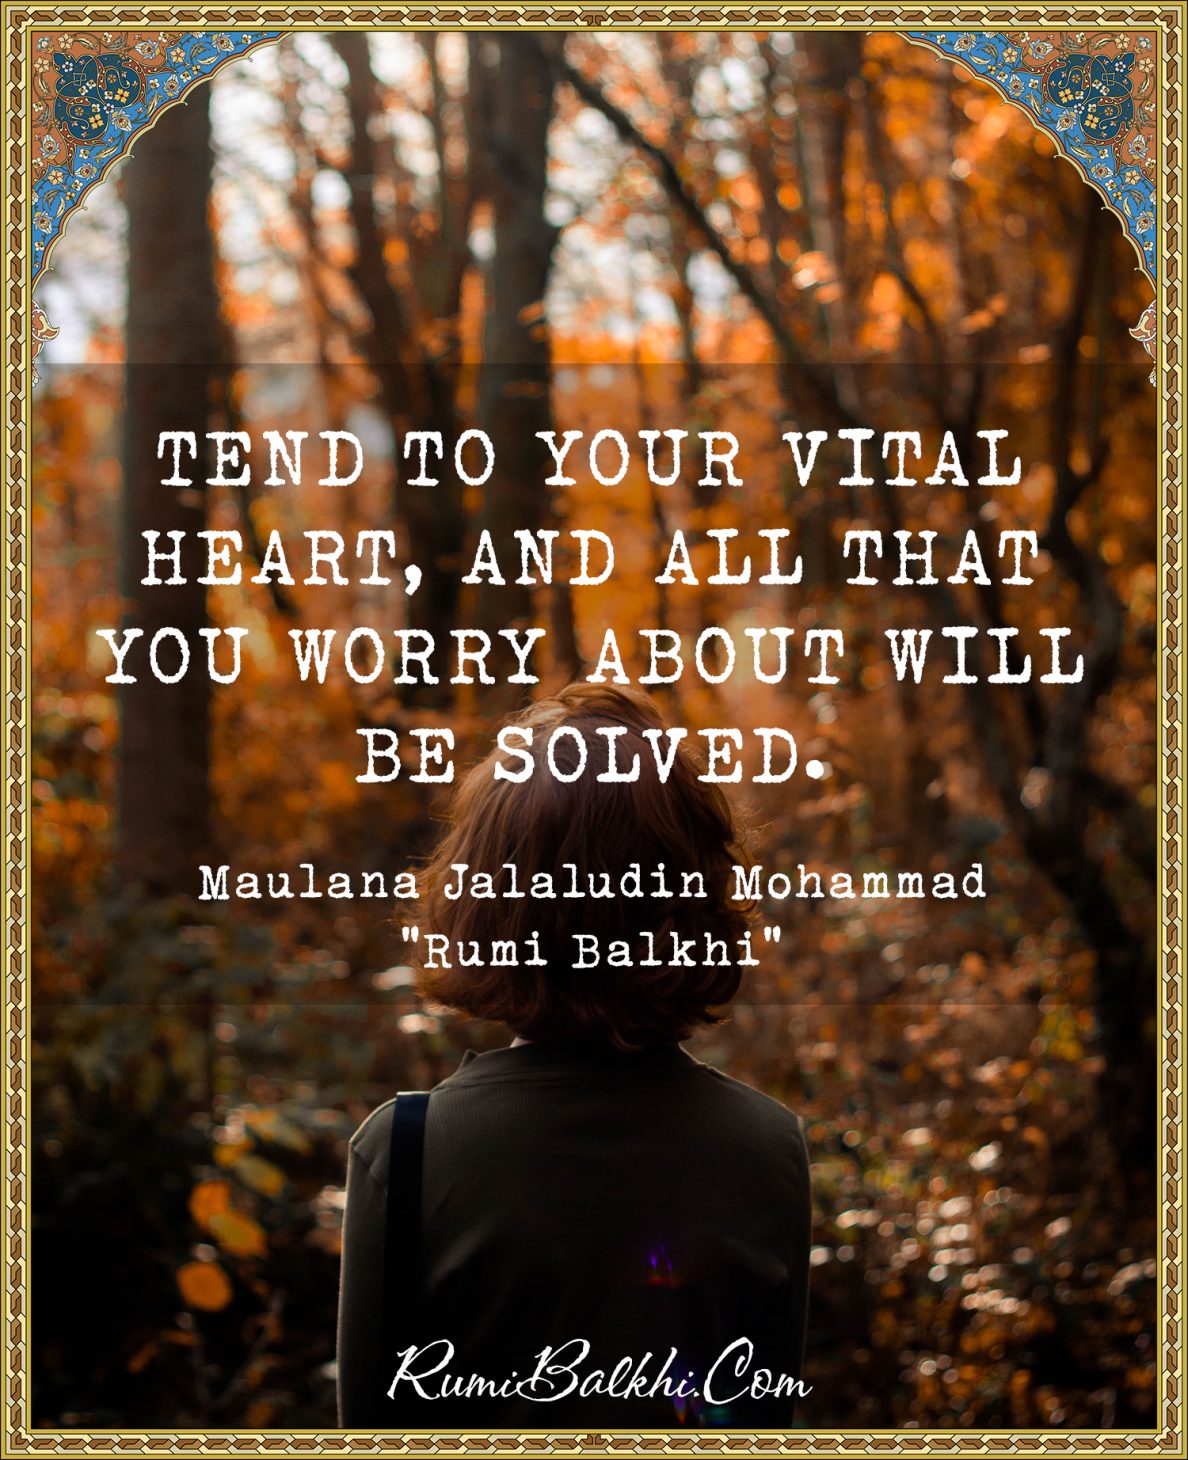 Tend to your vital heart, and all that you worry about will be solved